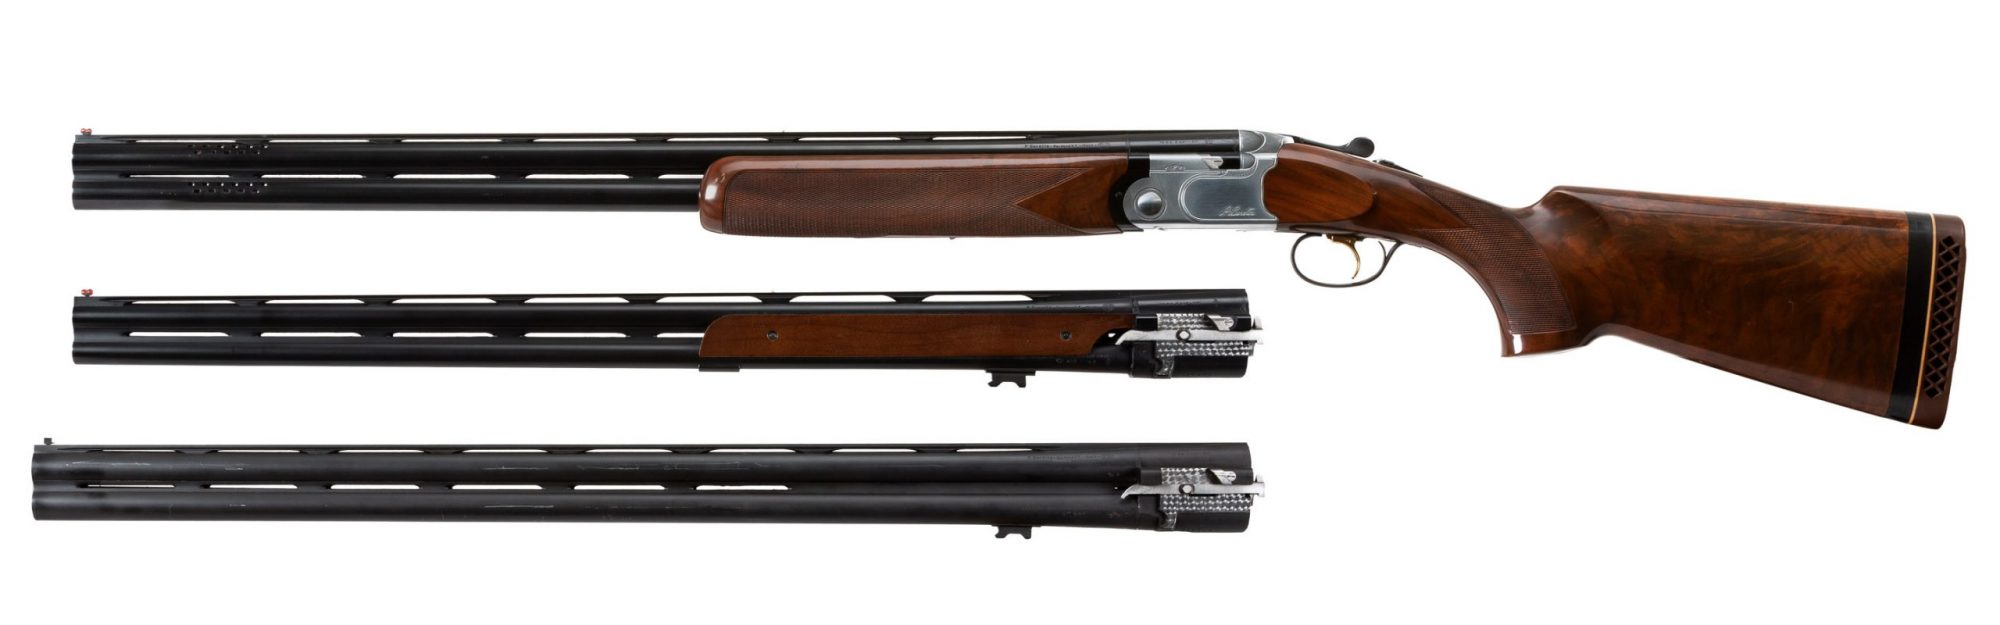 Photo of a pre-owned Beretta 682 three-barrel set with hard case, for sale by Turnbull Restoration of Bloomfield, NY